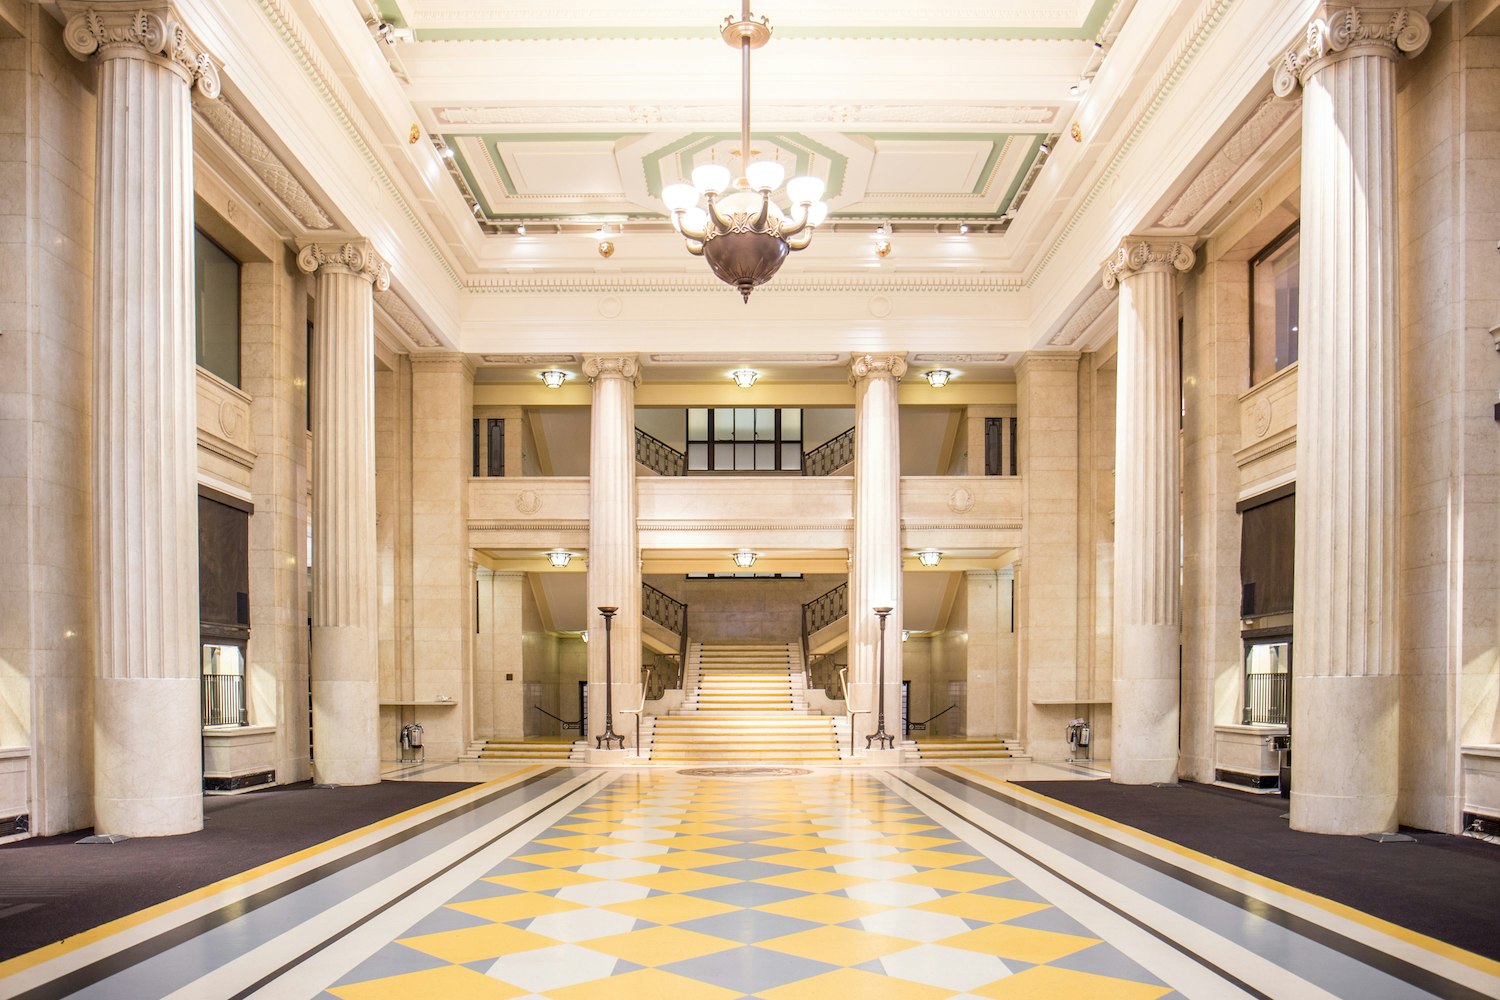 Banqueting Venues in West London - The Banking Hall